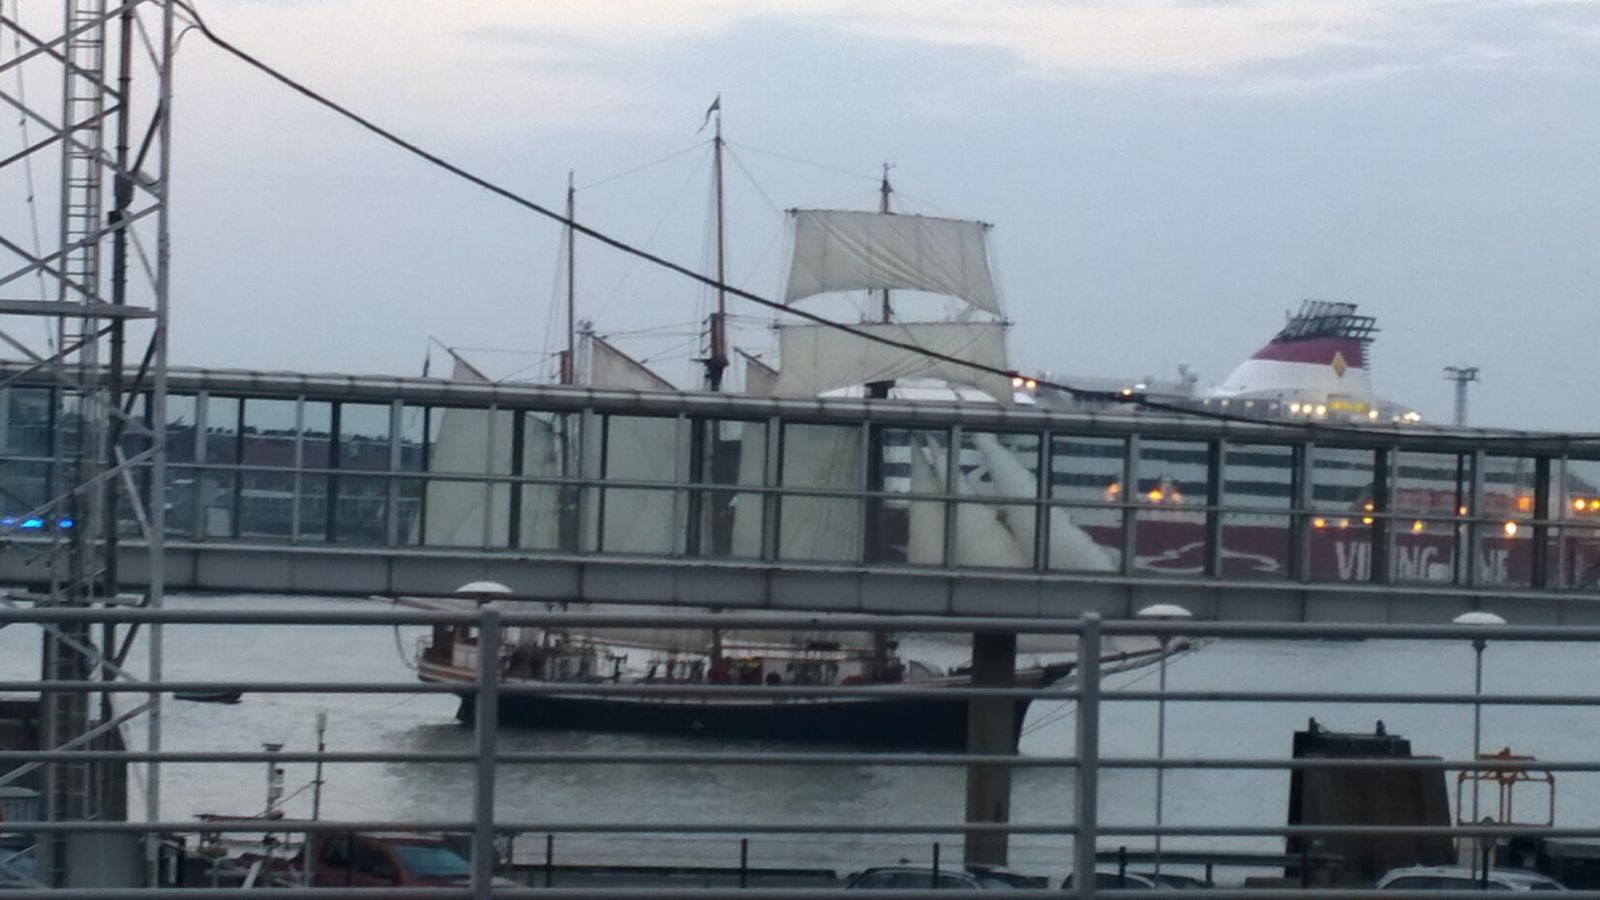 Bad photo of a cool ship.